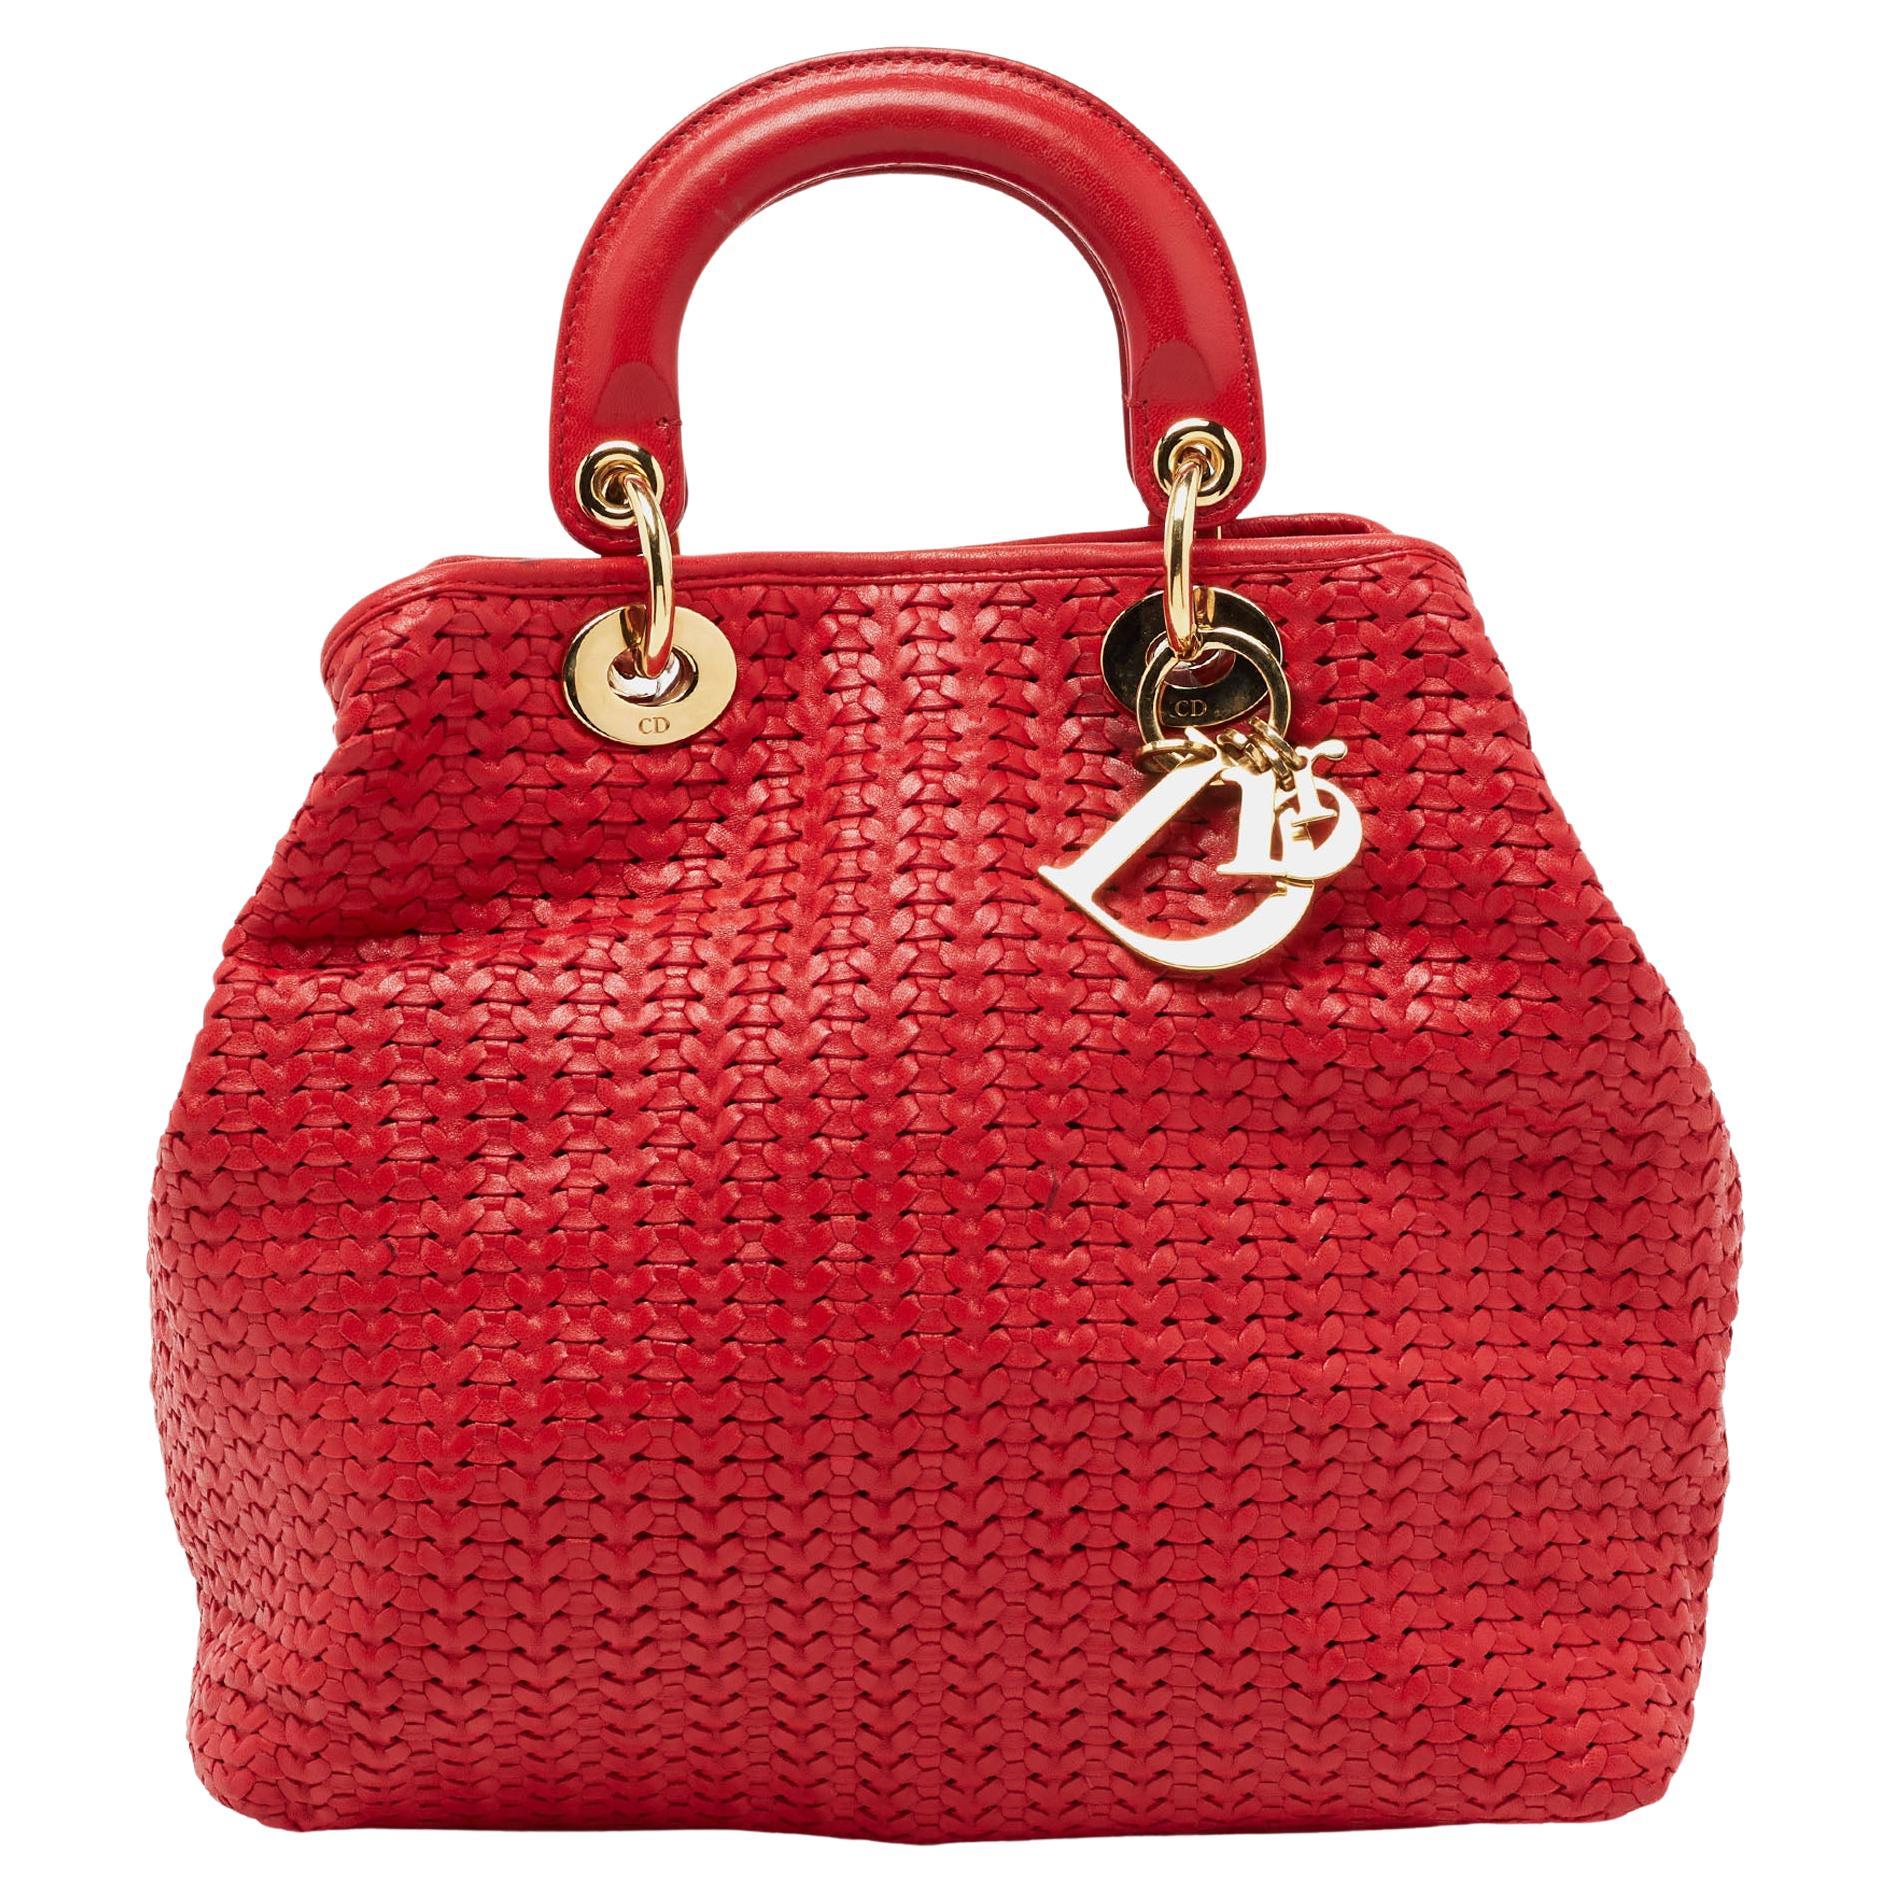 Dior Red Woven Leather Medium Soft Lady Dior Tote